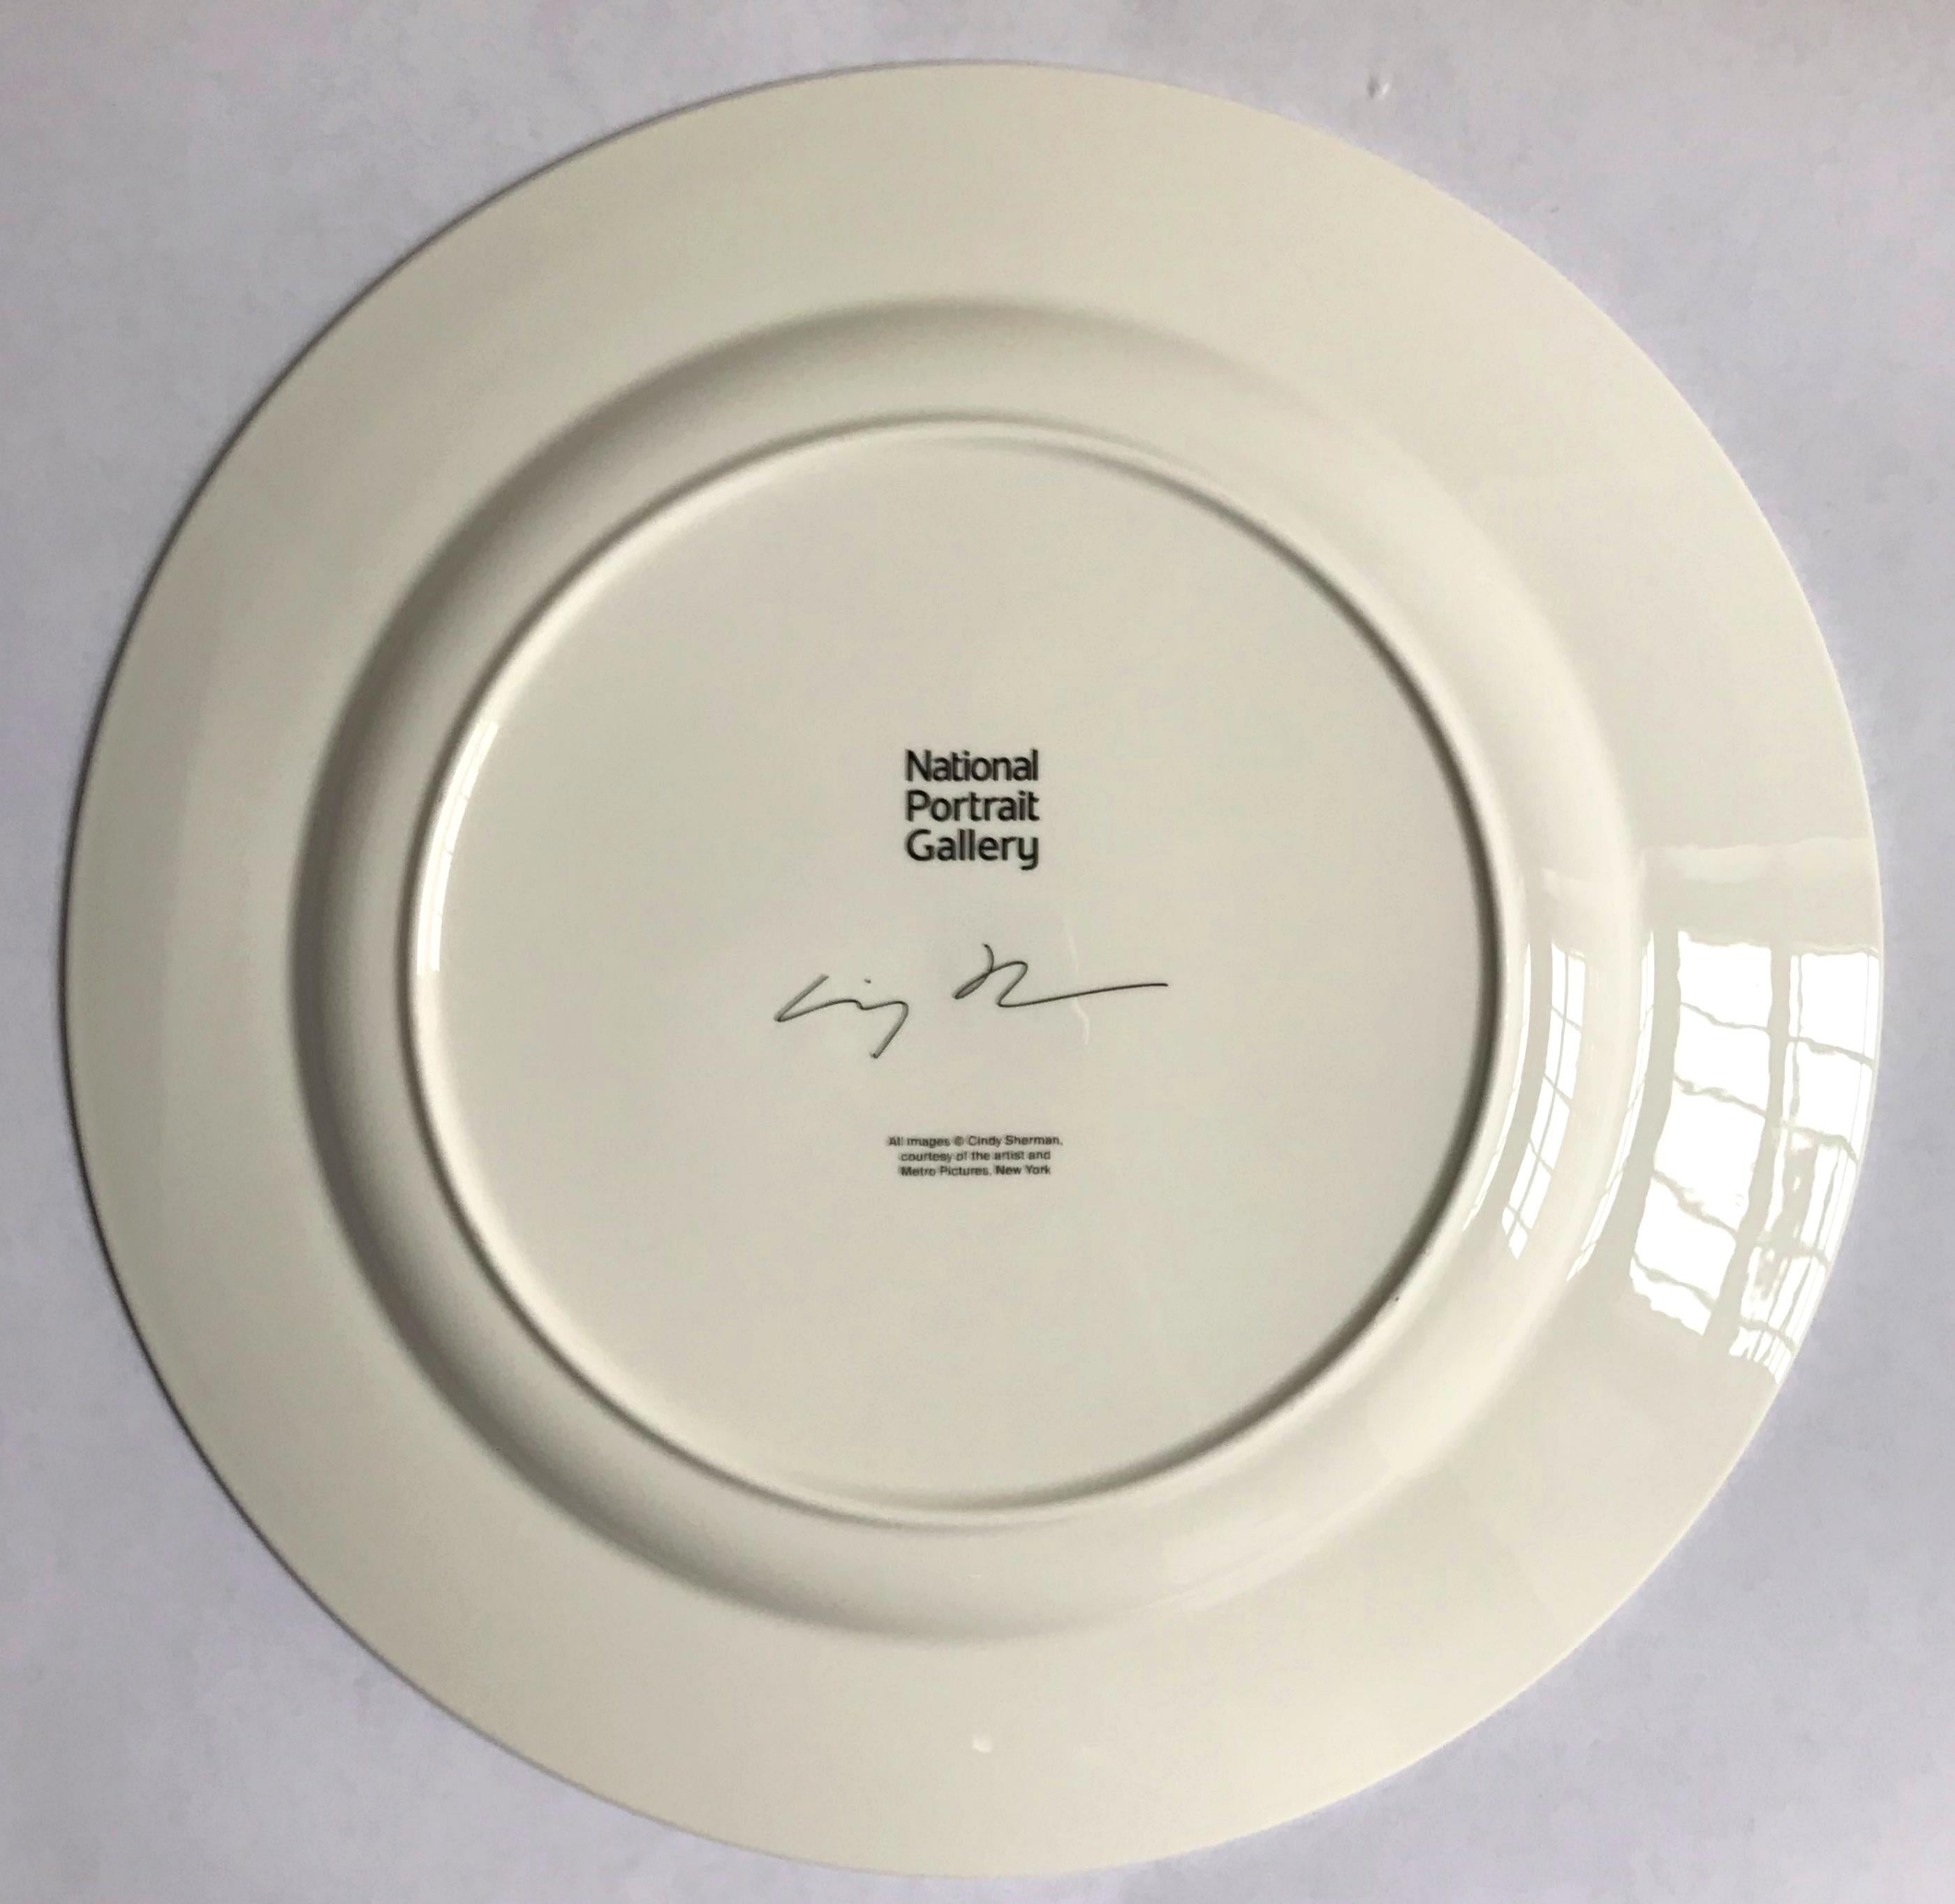 Cindy Sherman
The Nine Lives of Cindy, 2019
Printed Bone Porcelain
12 1/2 in diameter
Limited Edition of 100
Plate signed verso and also accompanied by plate signed documentation card/official Certificate of Authenticity
In original box
Produced